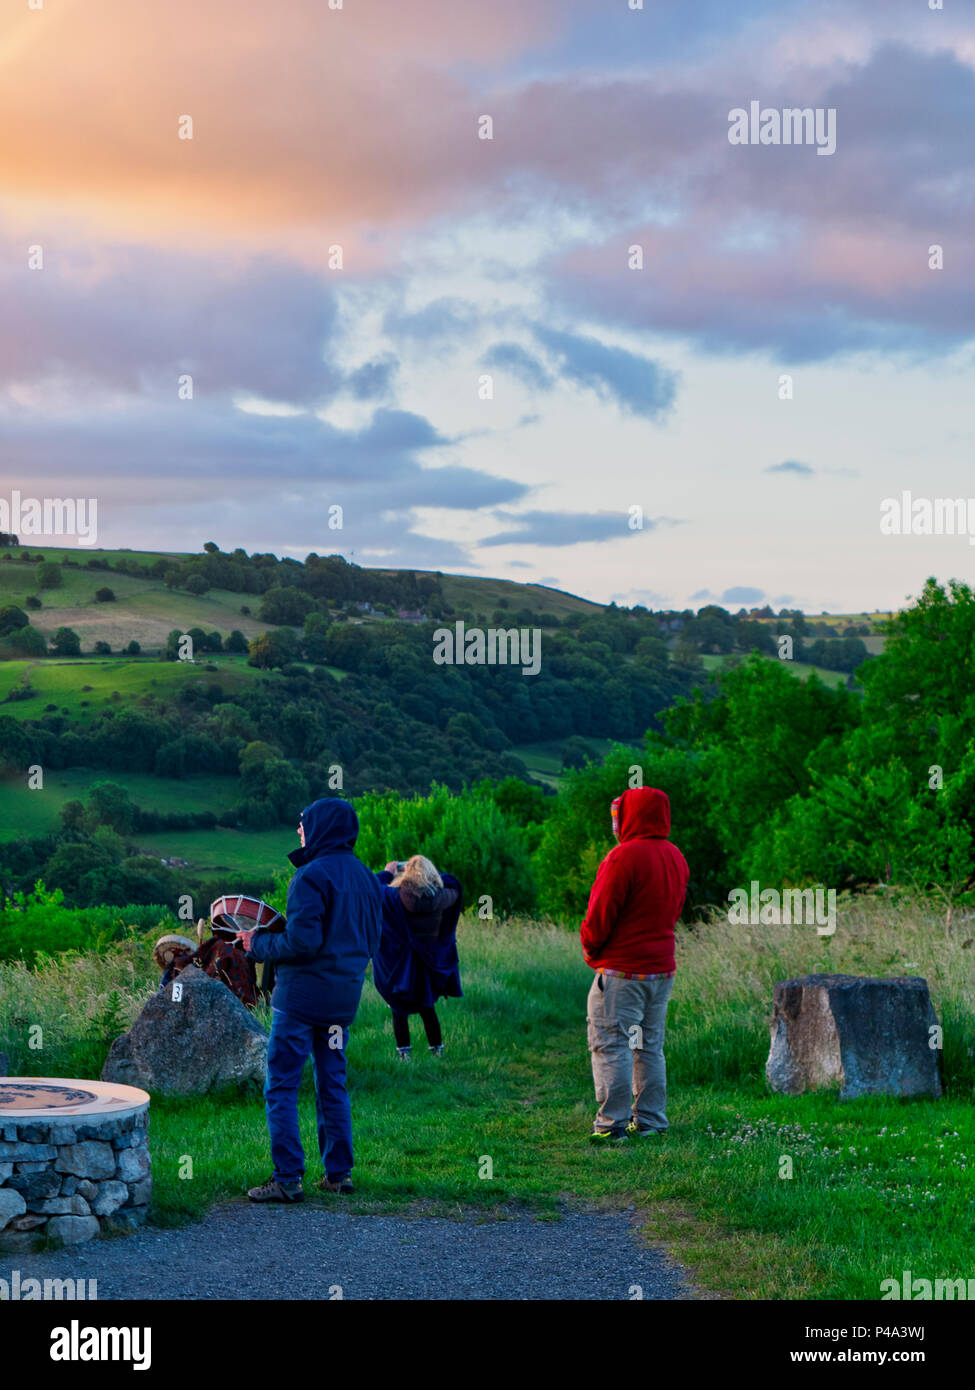 Wirksworth, Derbyshire, UK. 21st June, 2018. Summer solstice UK: Pagan’s celebrating the sun rising on the summer estival solstice at the star disc above Wirksworth in the Derbyshire Dales. UK Weather, sunrise in Derbyshire of the longest day of the year. Credit: Doug Blane/Alamy Live News Stock Photo